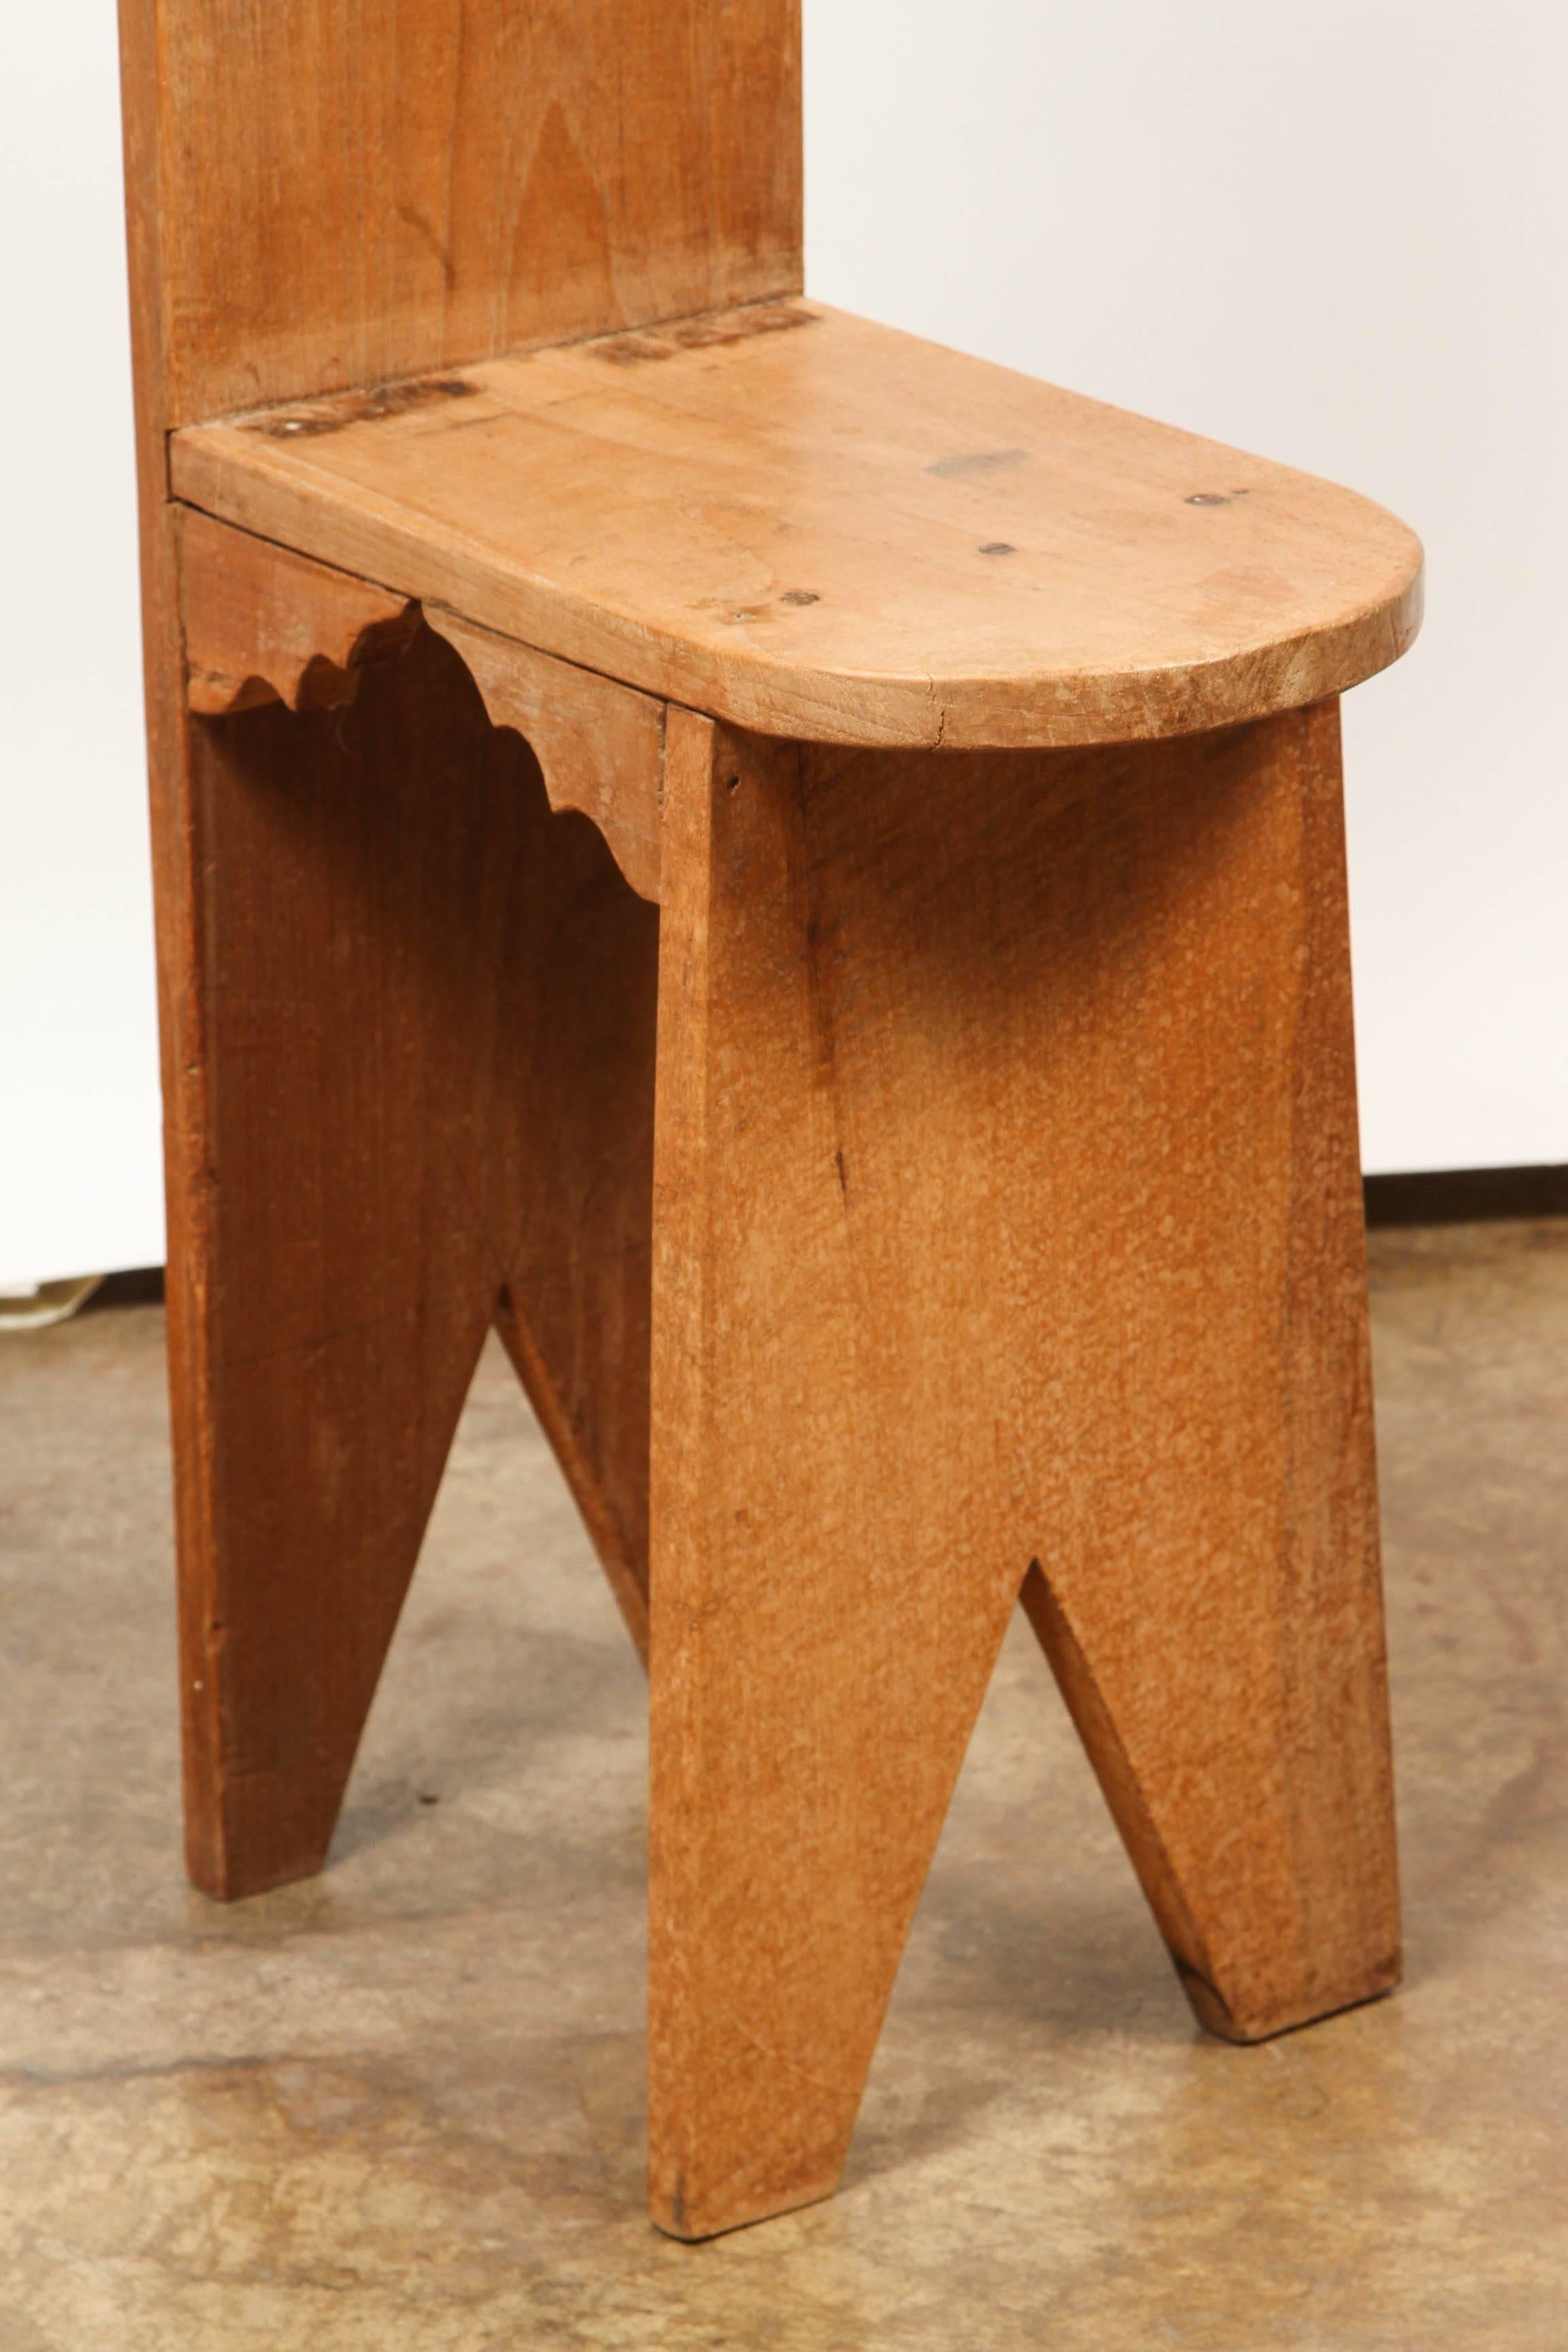 A country Indonesian Highback chair, with simple carved lines and a decorative top